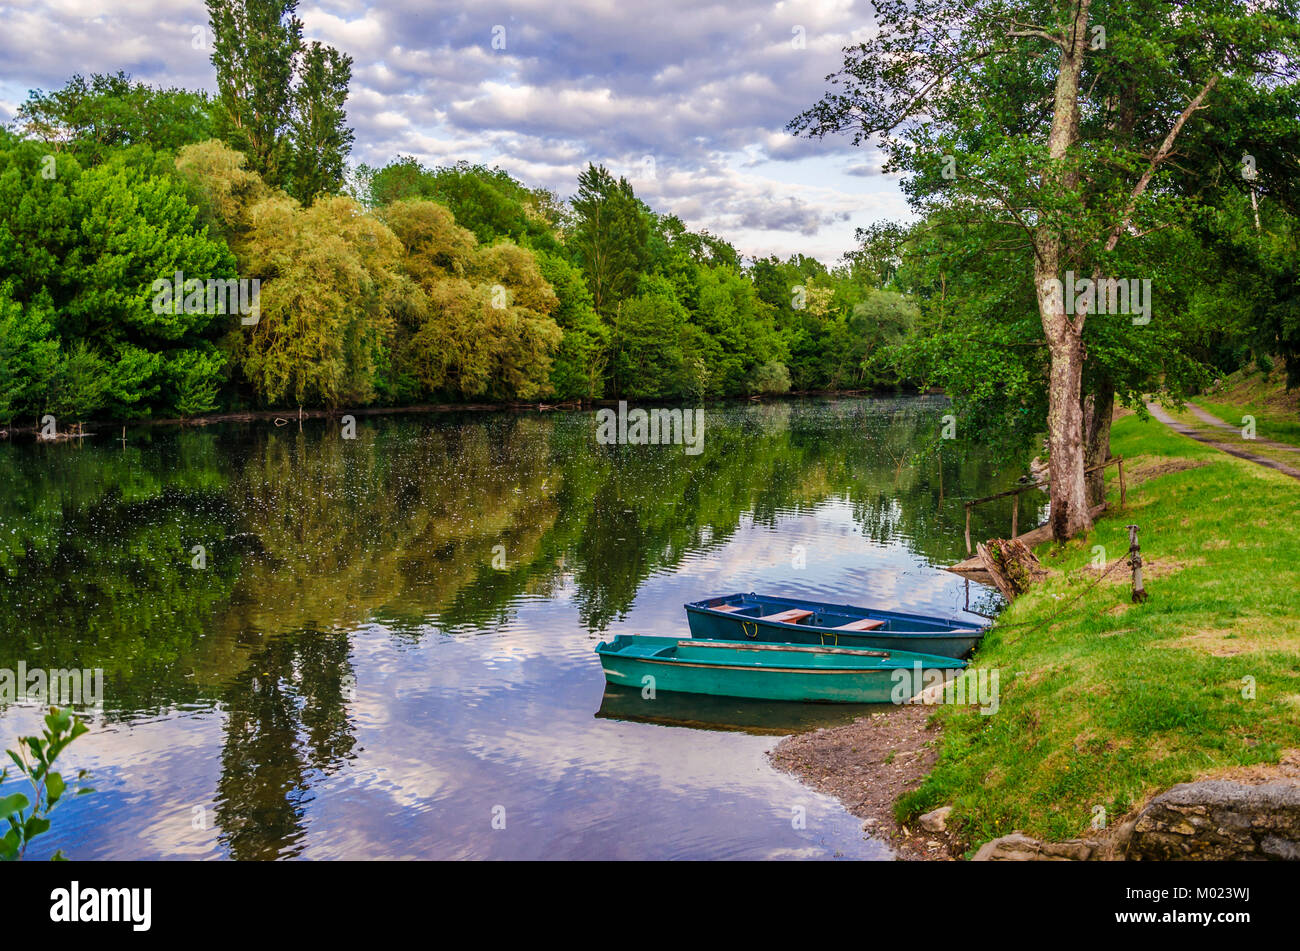 Valley of the river Dordogne two boats moored in the calm waters of the Dordogne in its passage through the village of Carennac France Stock Photo